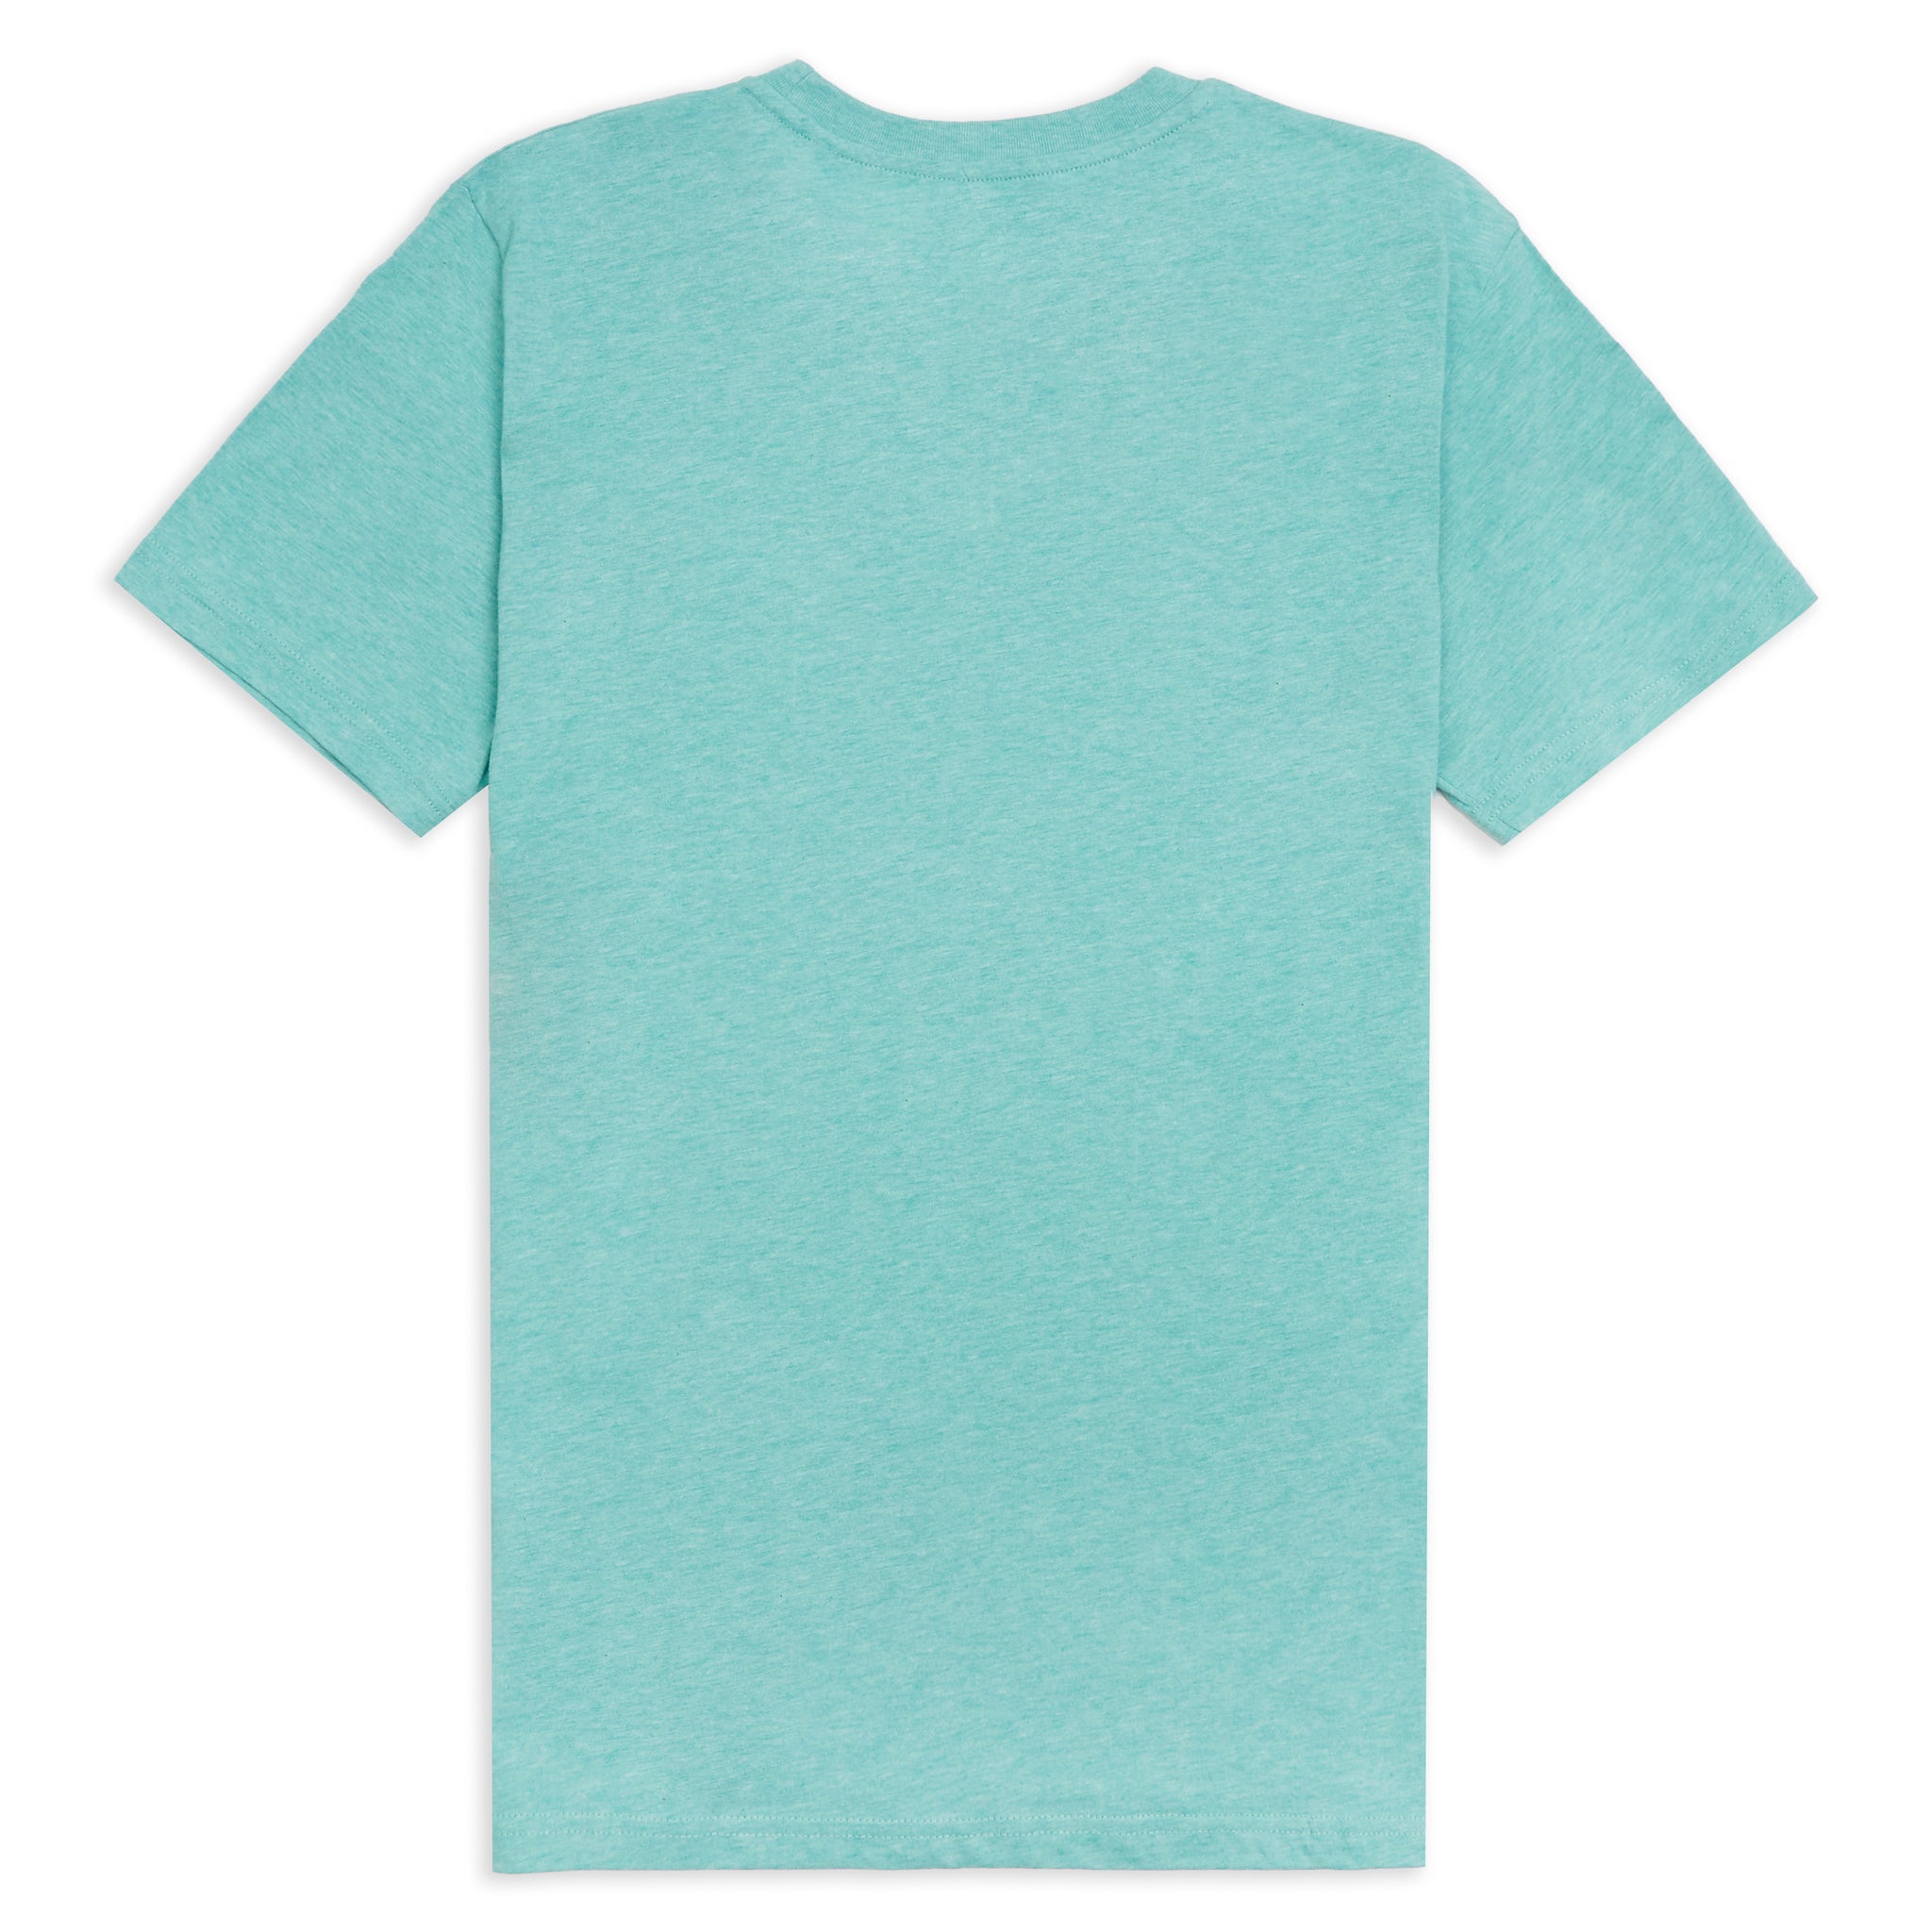 A Done Teal 30 Year™ T-Shirt